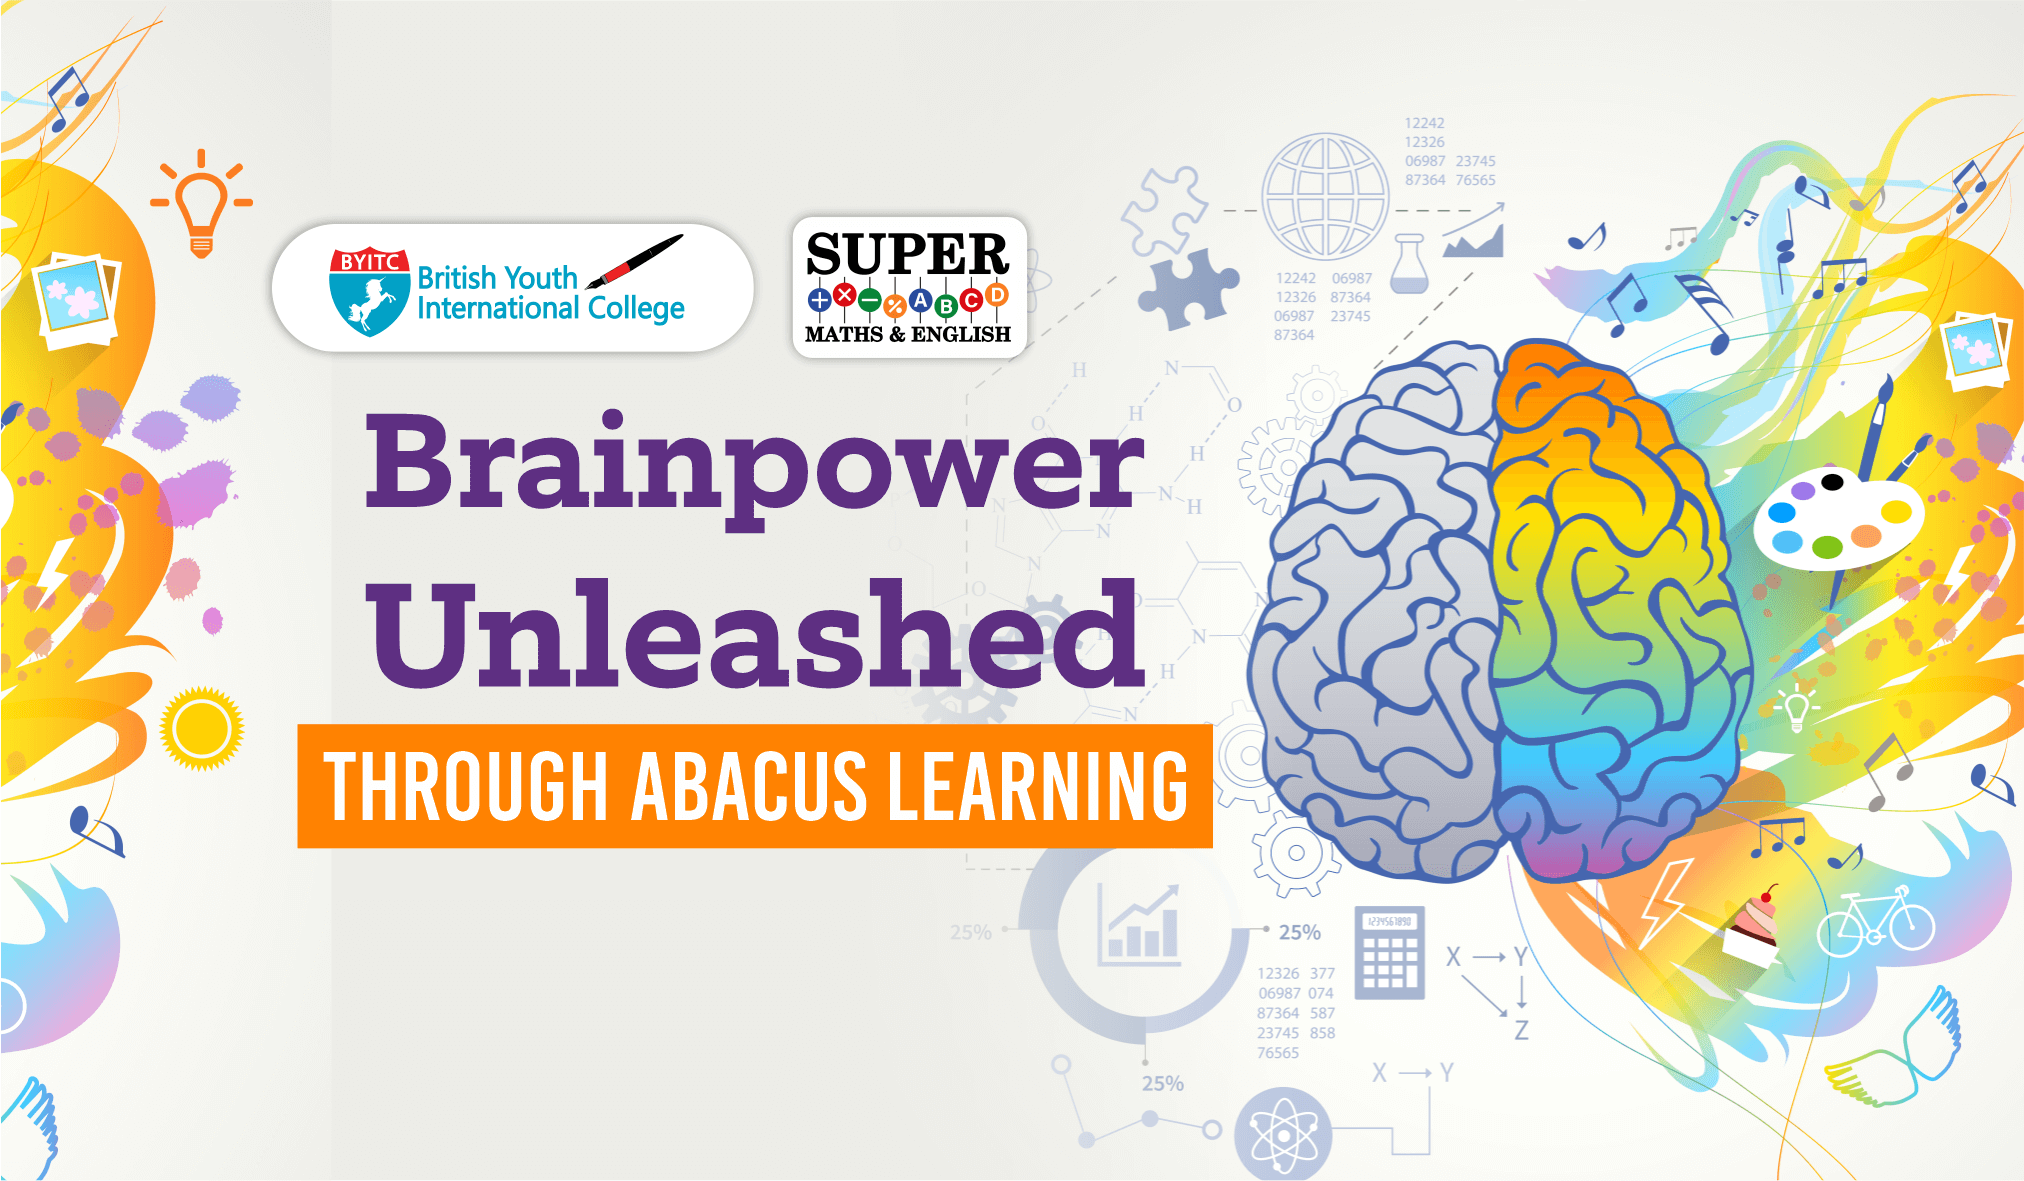 Brainpower Unleashed through Abacus Learning